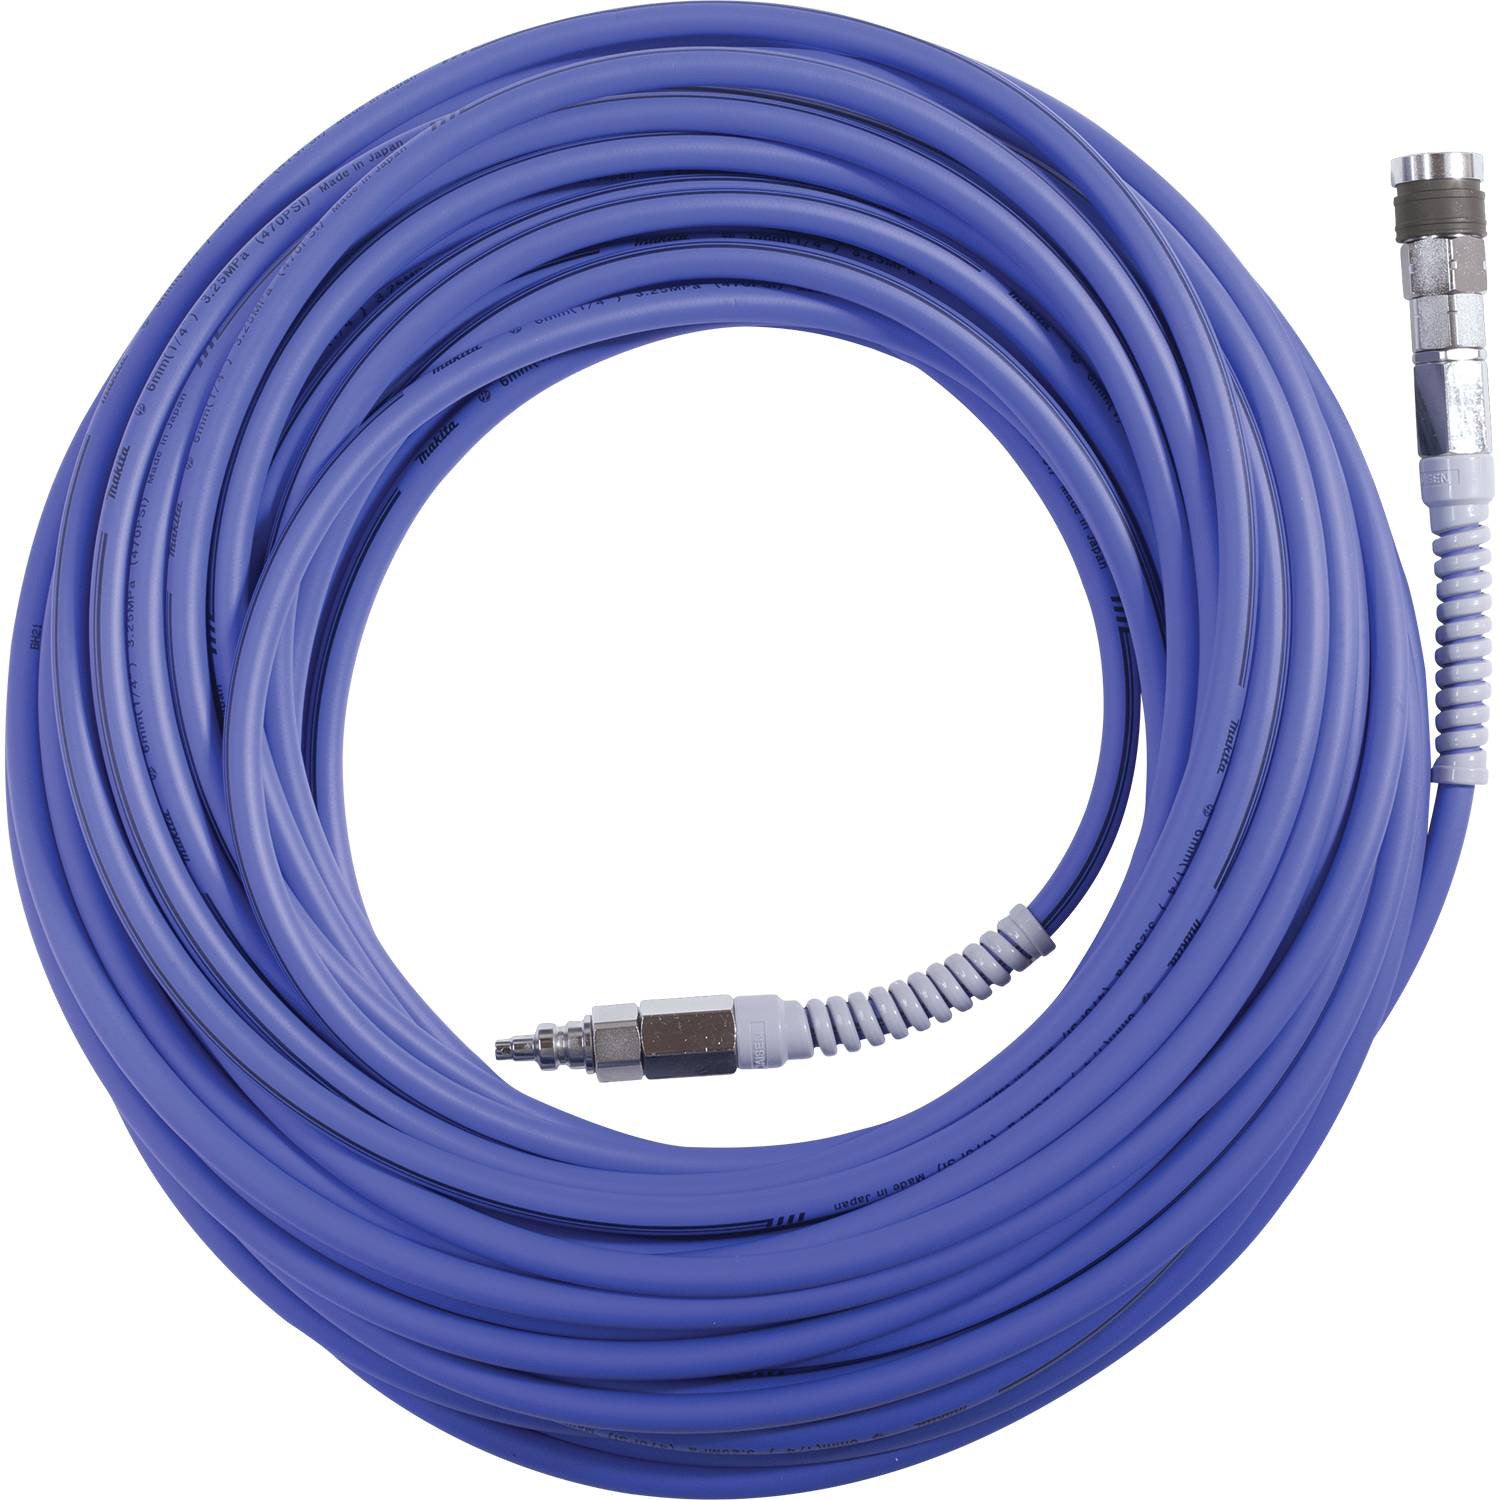 100' High Pressure Hose with Fittings